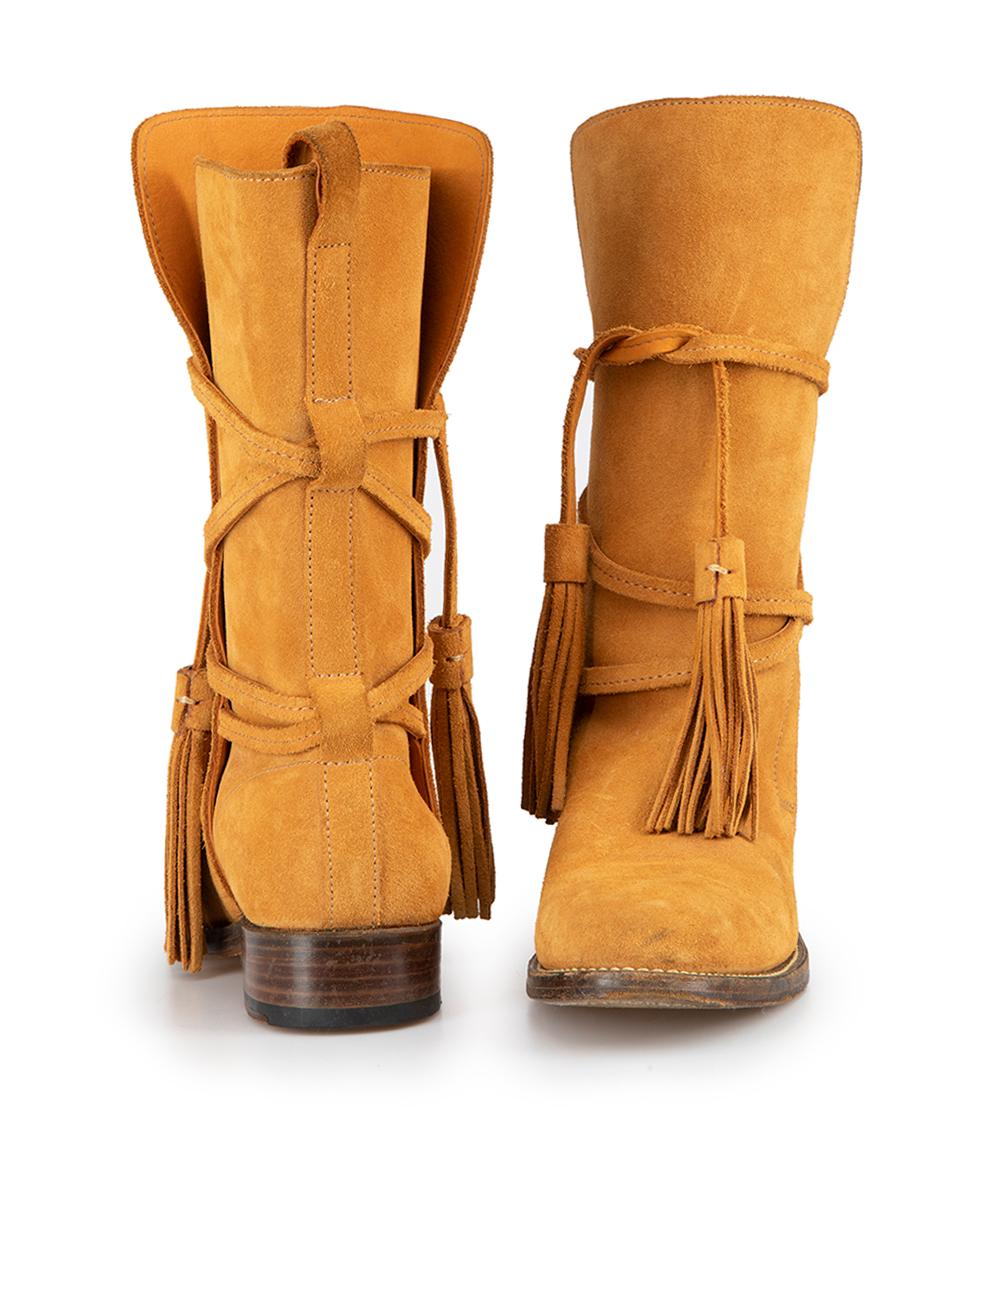 Saint Laurent Women's Ochre Suede Tie Detail Mid Calf Boots In Good Condition For Sale In London, GB